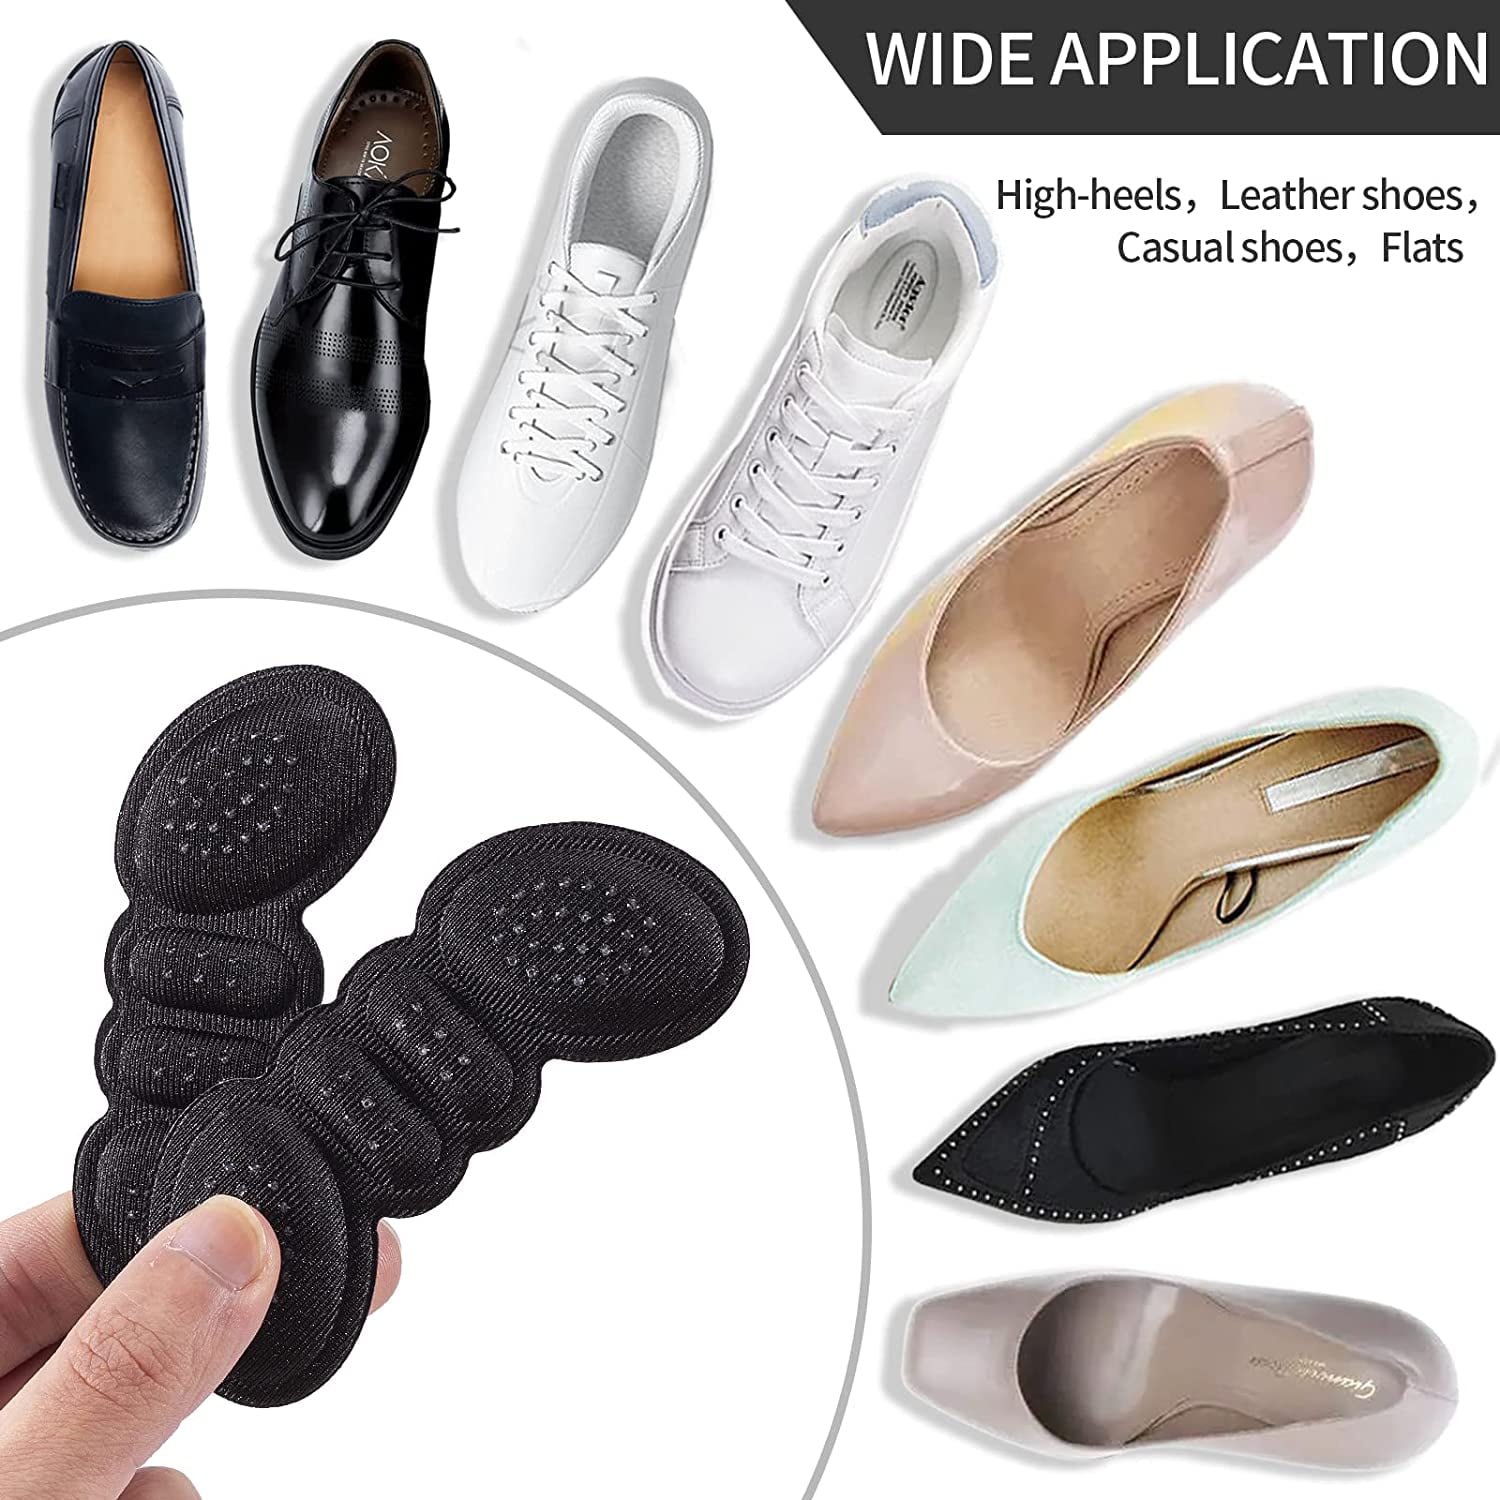 Fancy Feet Back-of-Heel Gel Cushions - One Pair of Cushioned Heels Inserts  to Prevent Rubbing and Blisters from Uncomfortable Shoes - Walmart.com